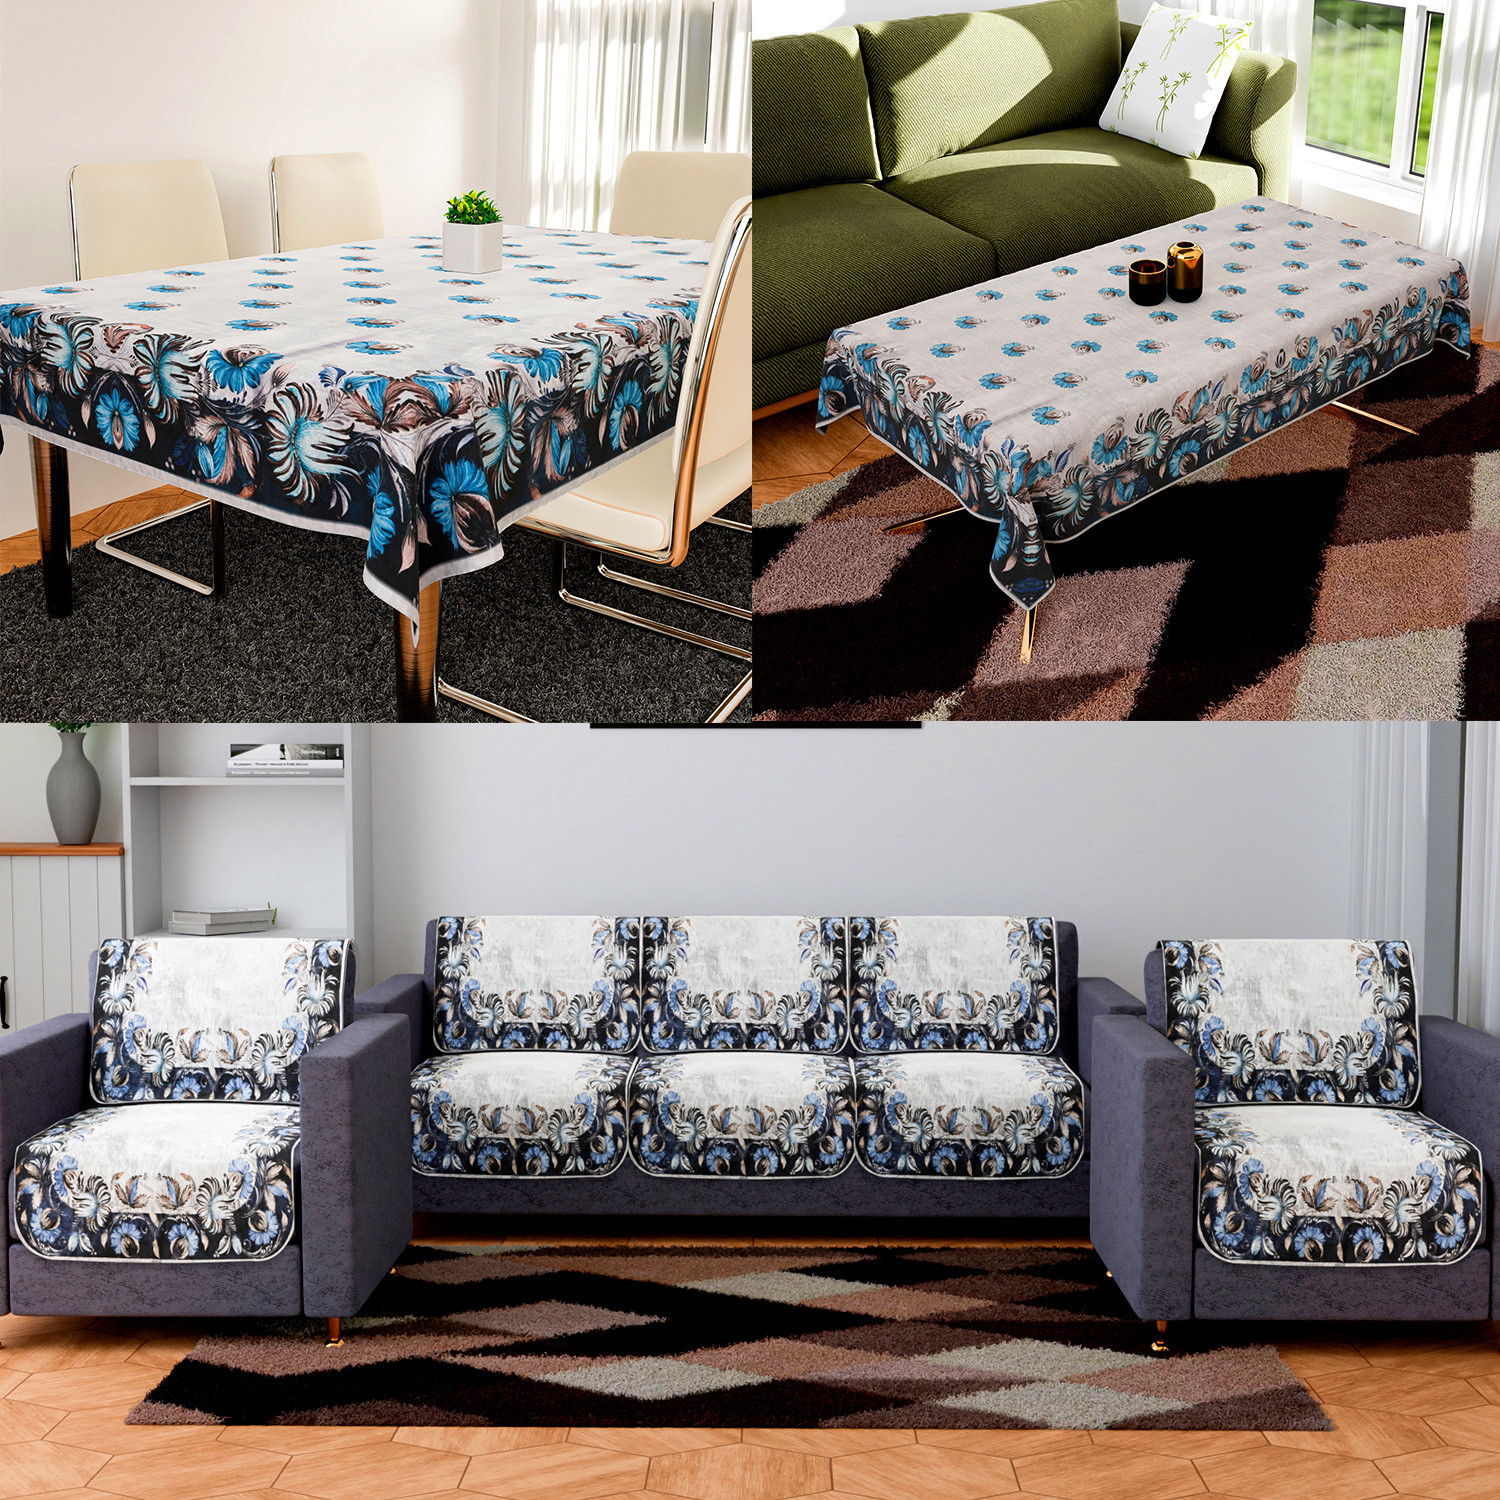 Kuber Industries Sofa-Center & Dining Table Cover Set | Blue Digital Flower Sofa-Center & Dining Table Cover | 5 Seater Sofa with Center-Dining Table Cover Set | Gray